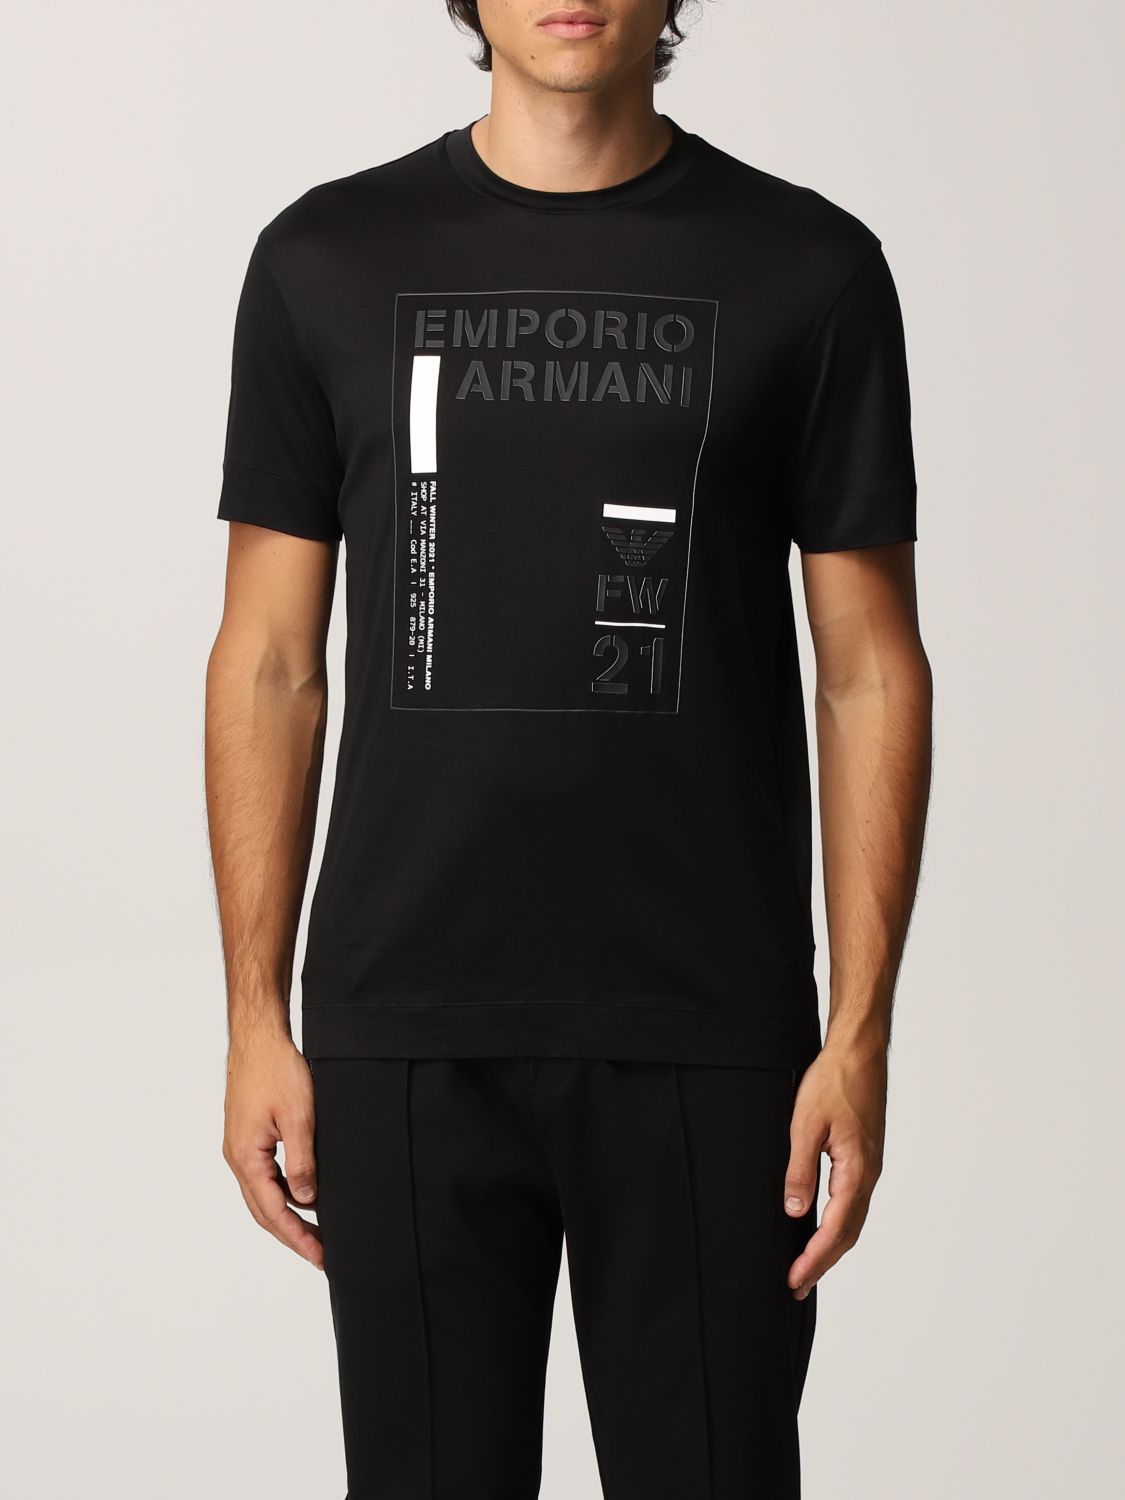 EMPORIO ARMANI: T-shirt in Tencel blend with logo and print - Black ...